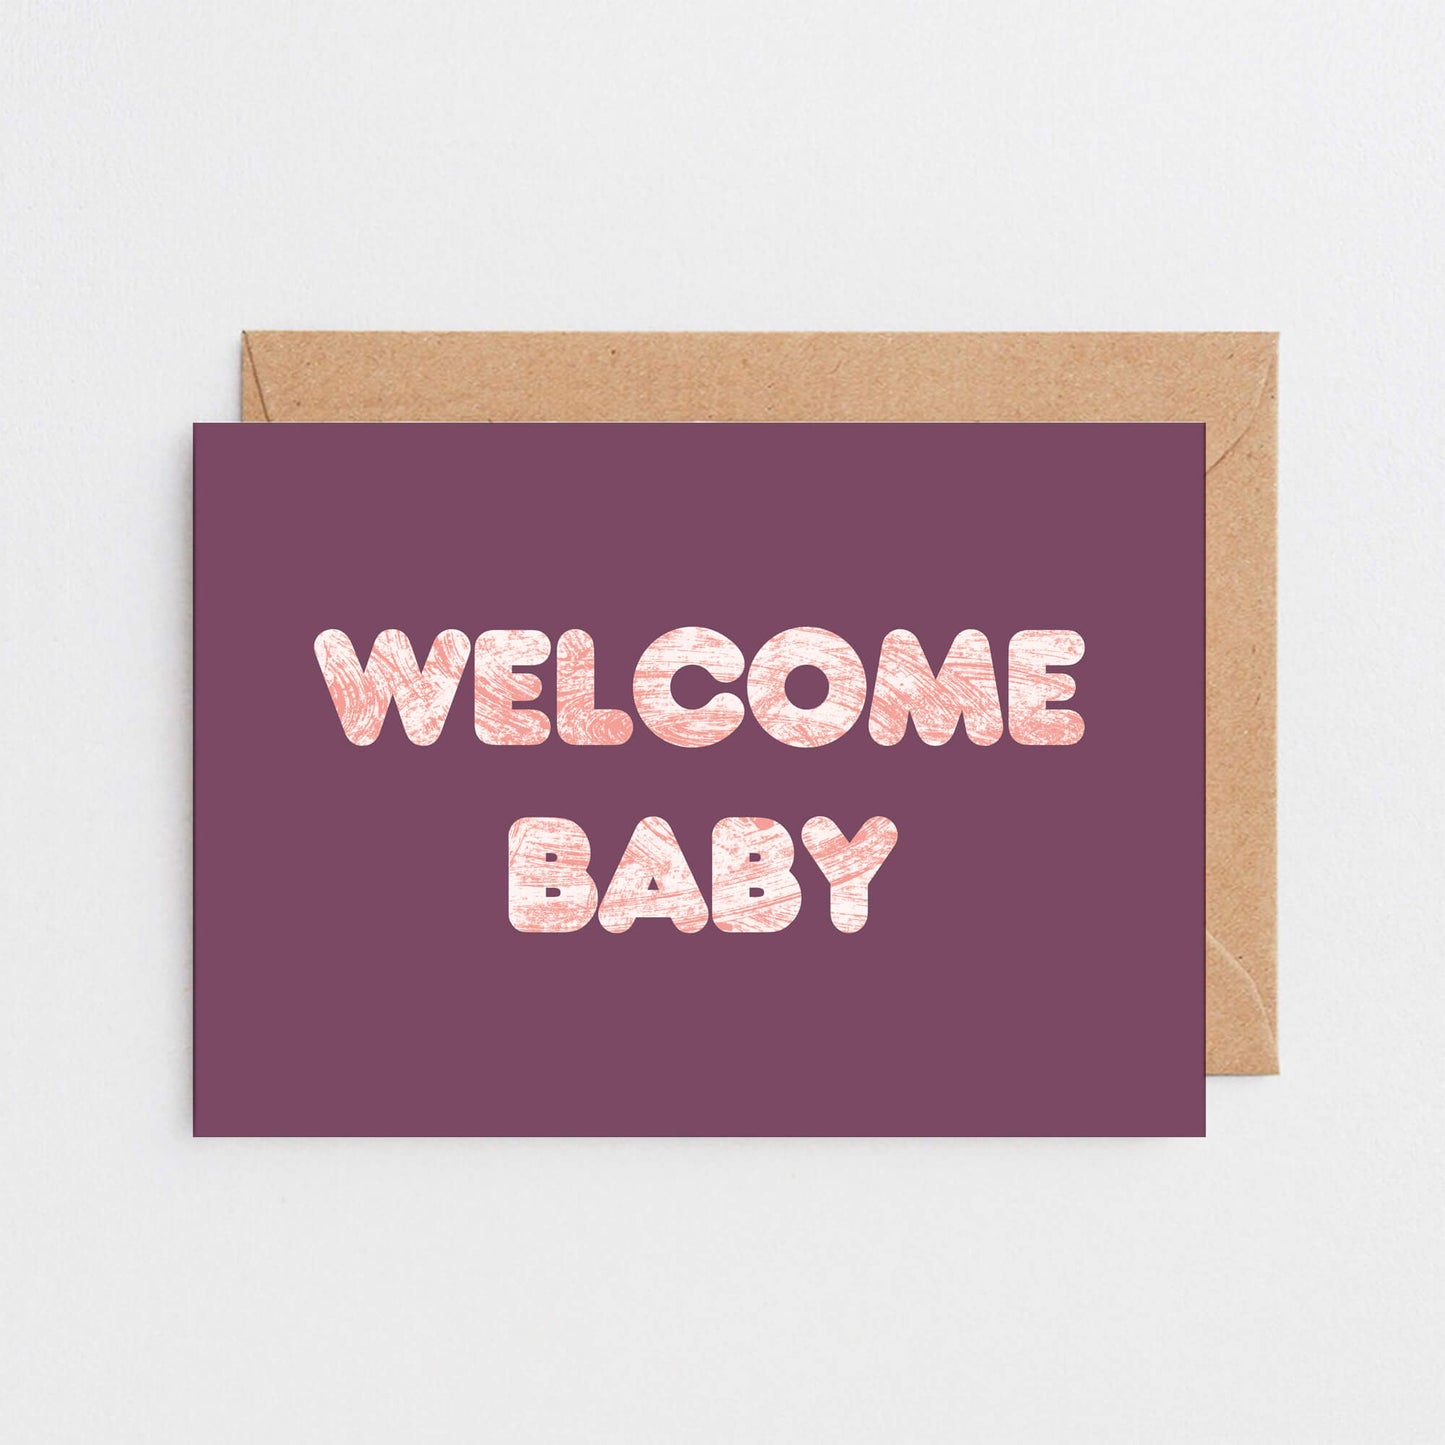 Welcome Baby Card by SixElevenCreations. Product Code SE5106A6